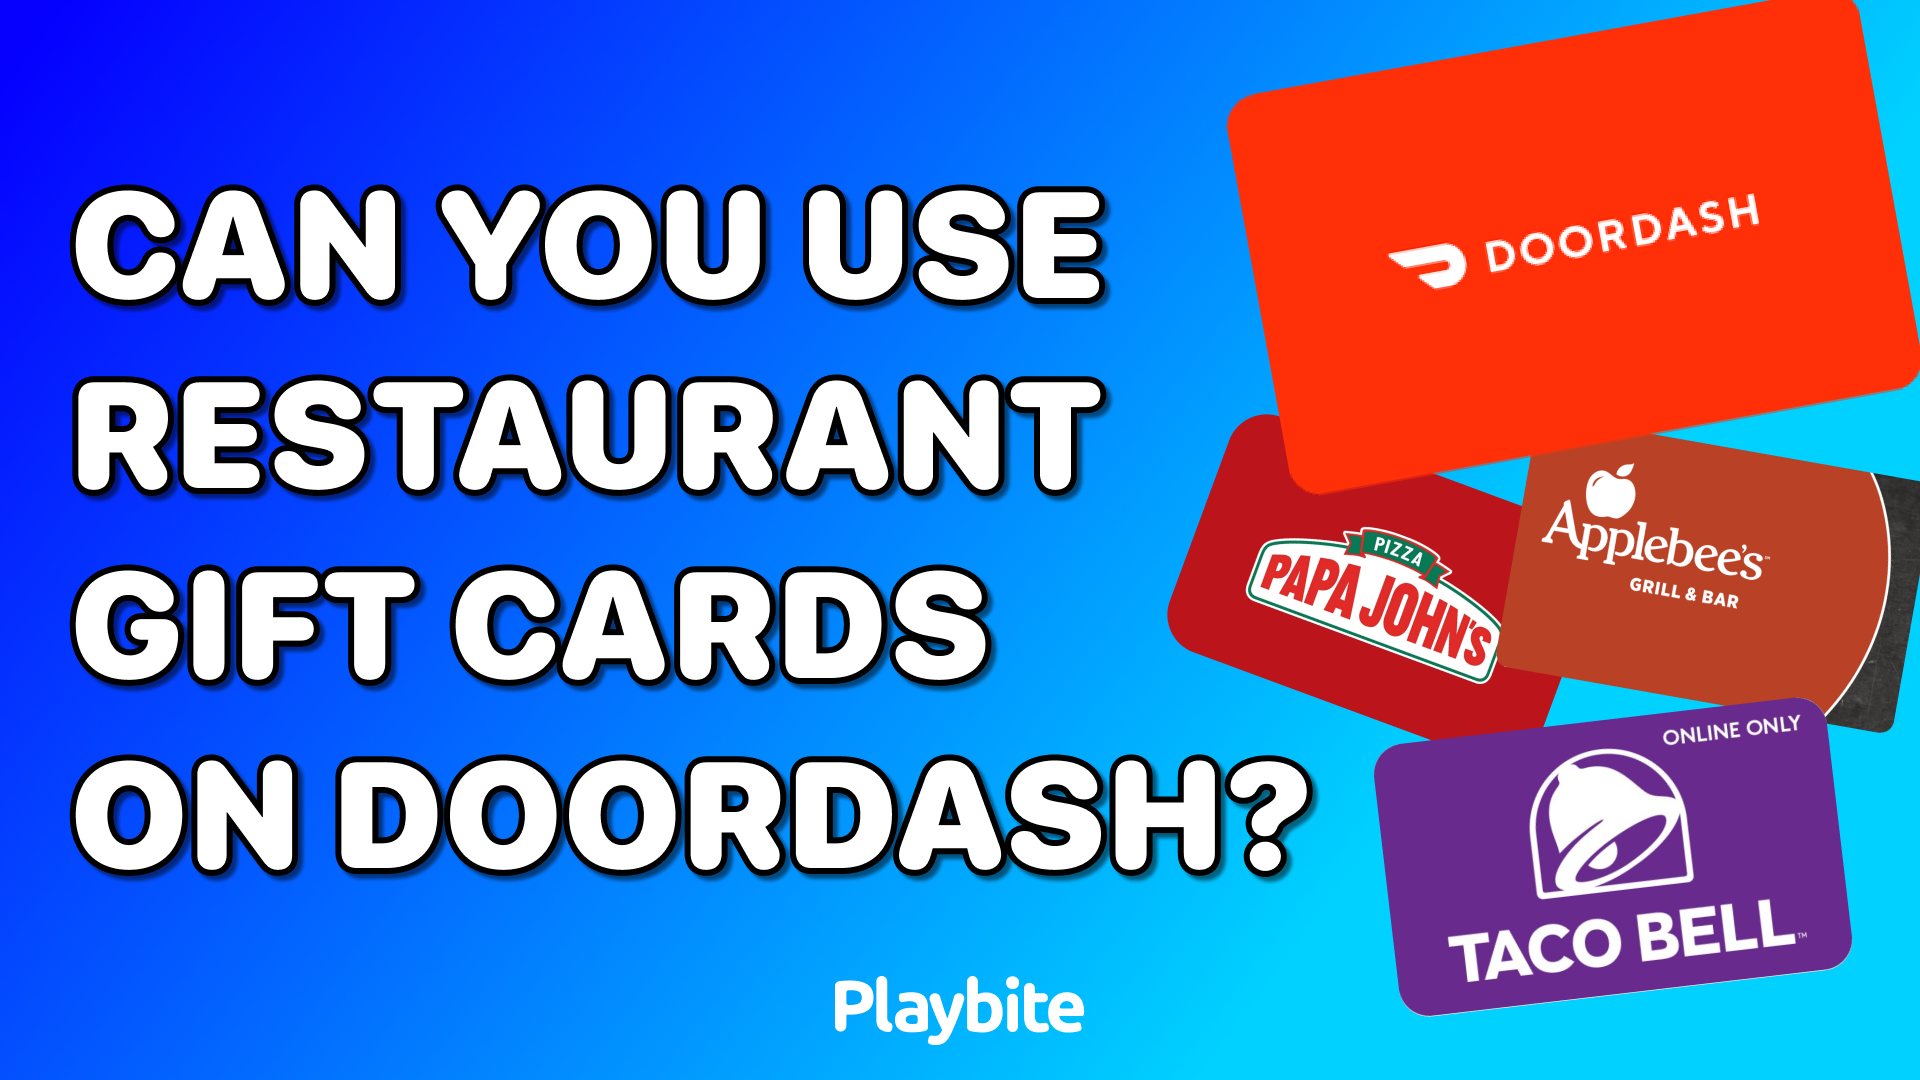 Can You Use Restaurant Gift Cards On DoorDash?